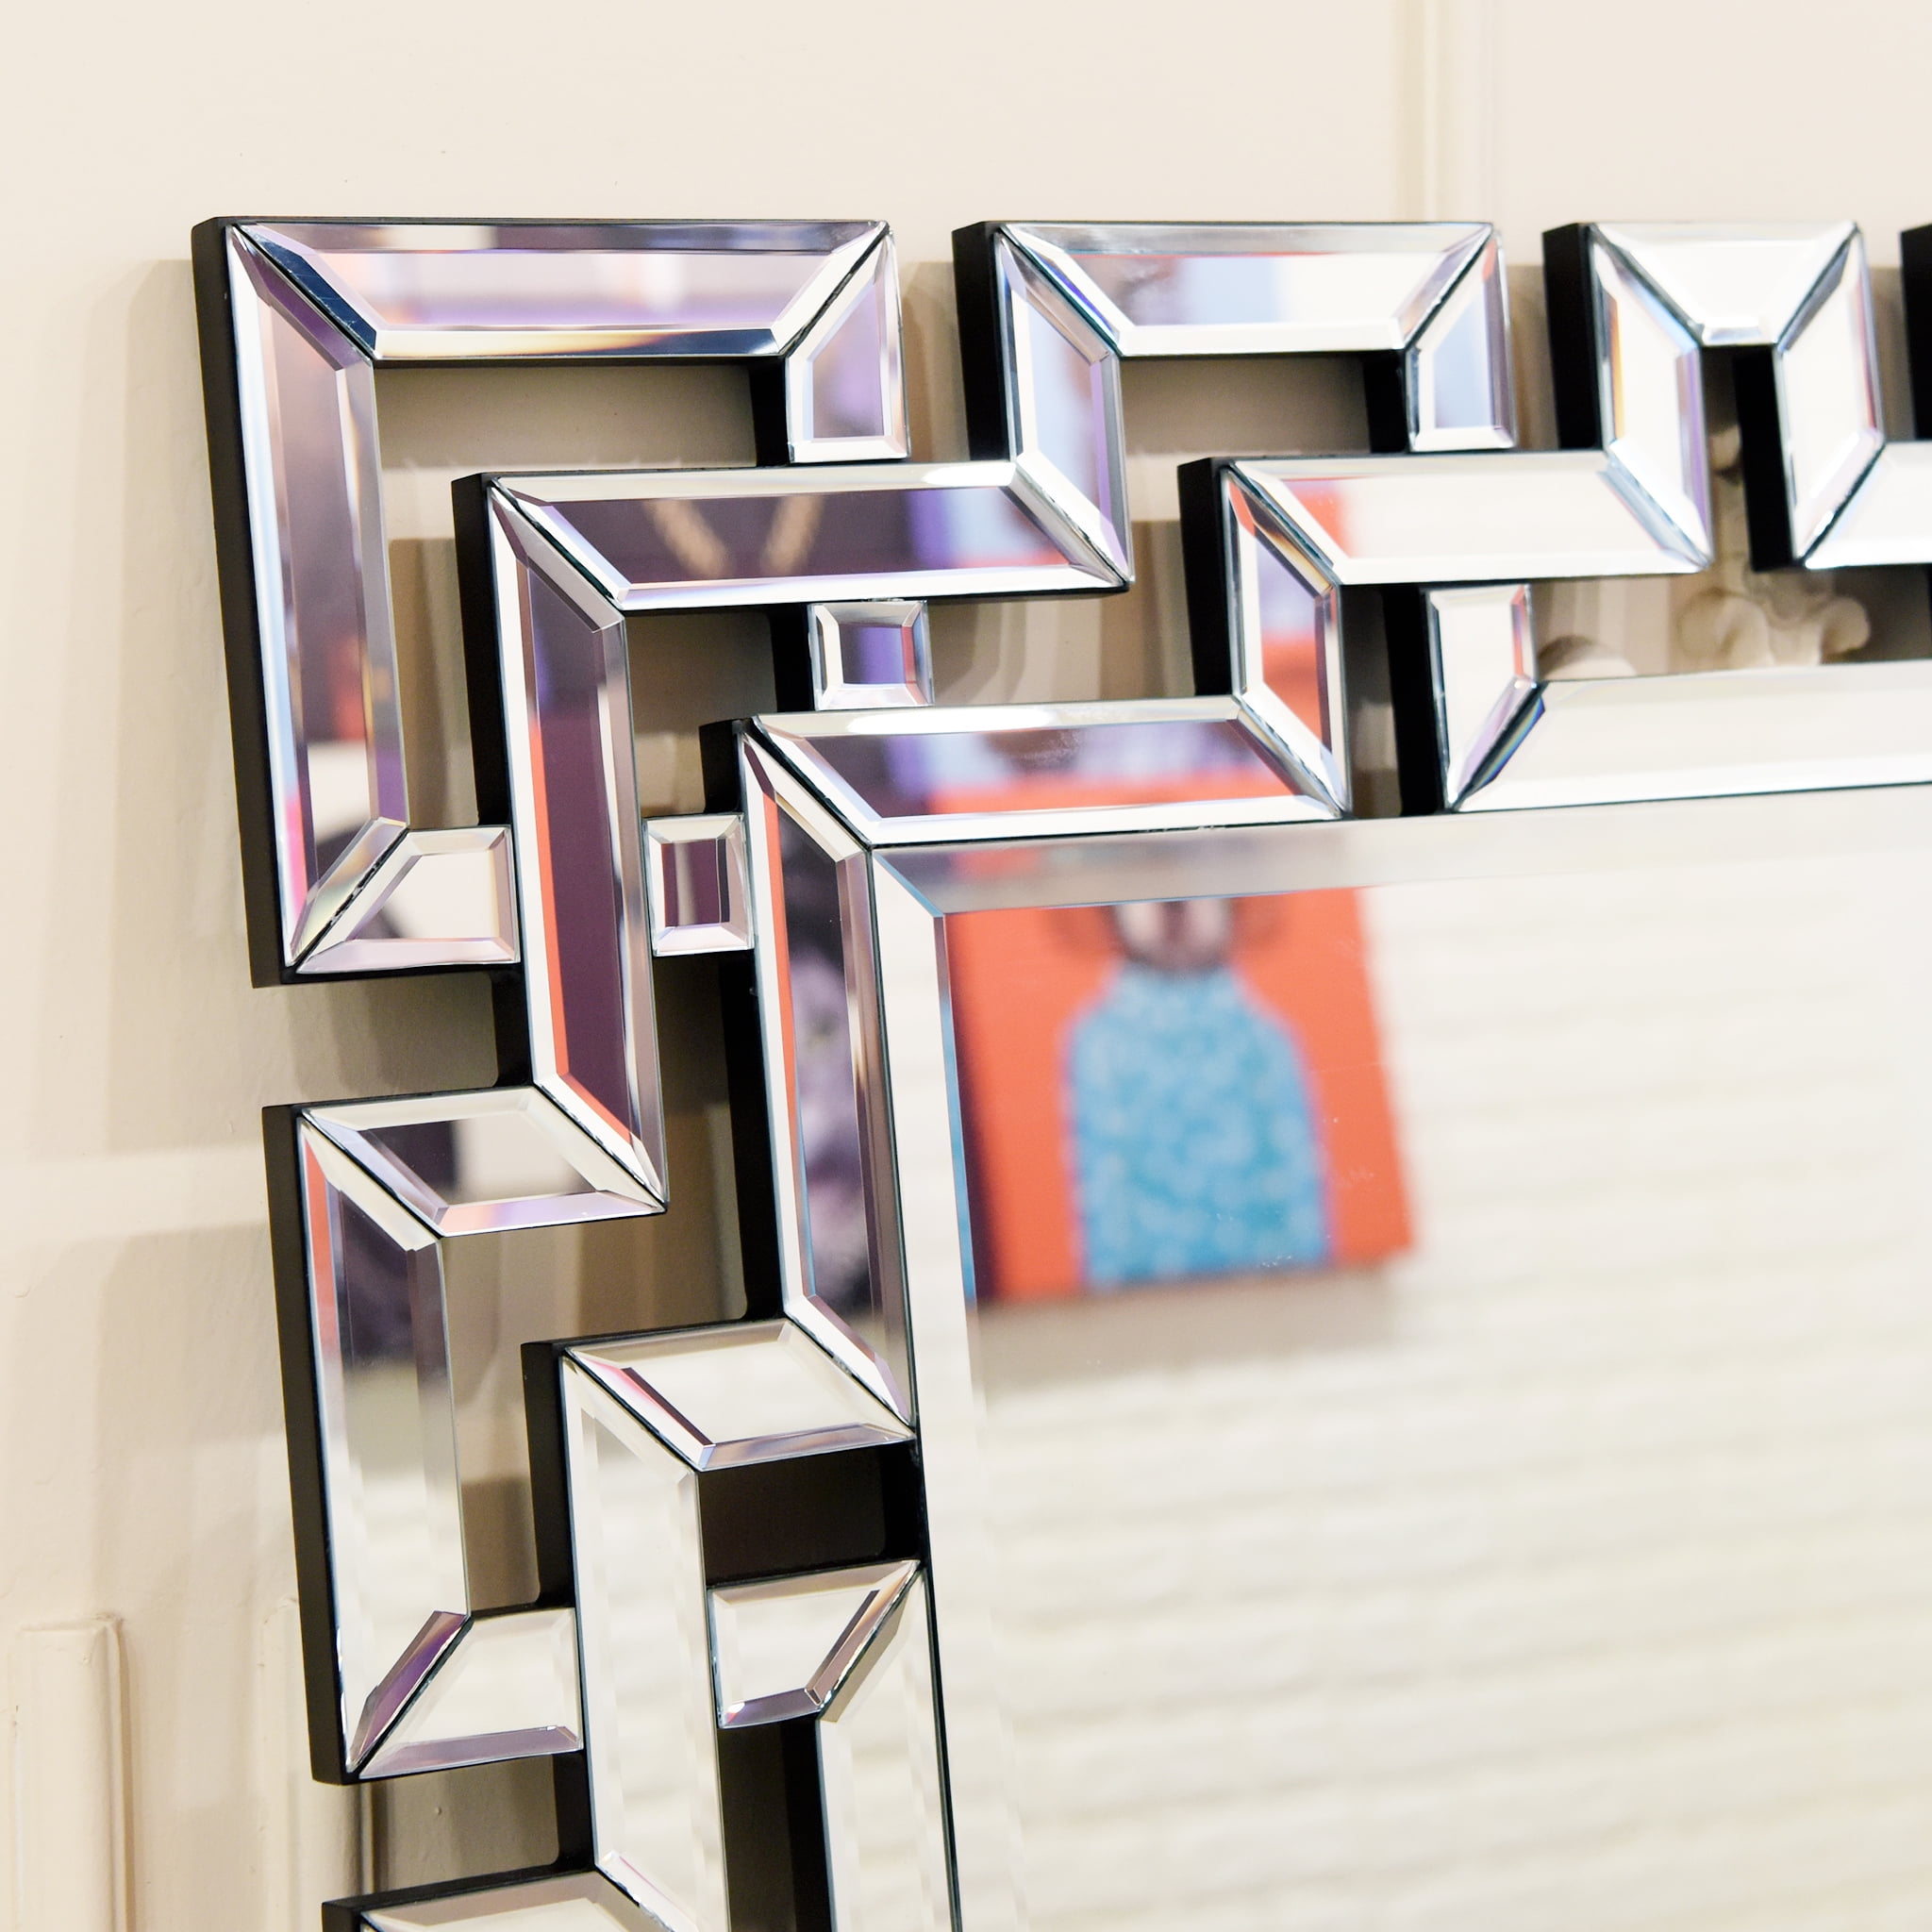 Modern Style Wooden Decorative Mirror with Rhinestone Inlays, Silver - 40 H x 44 W x 2 L Inches